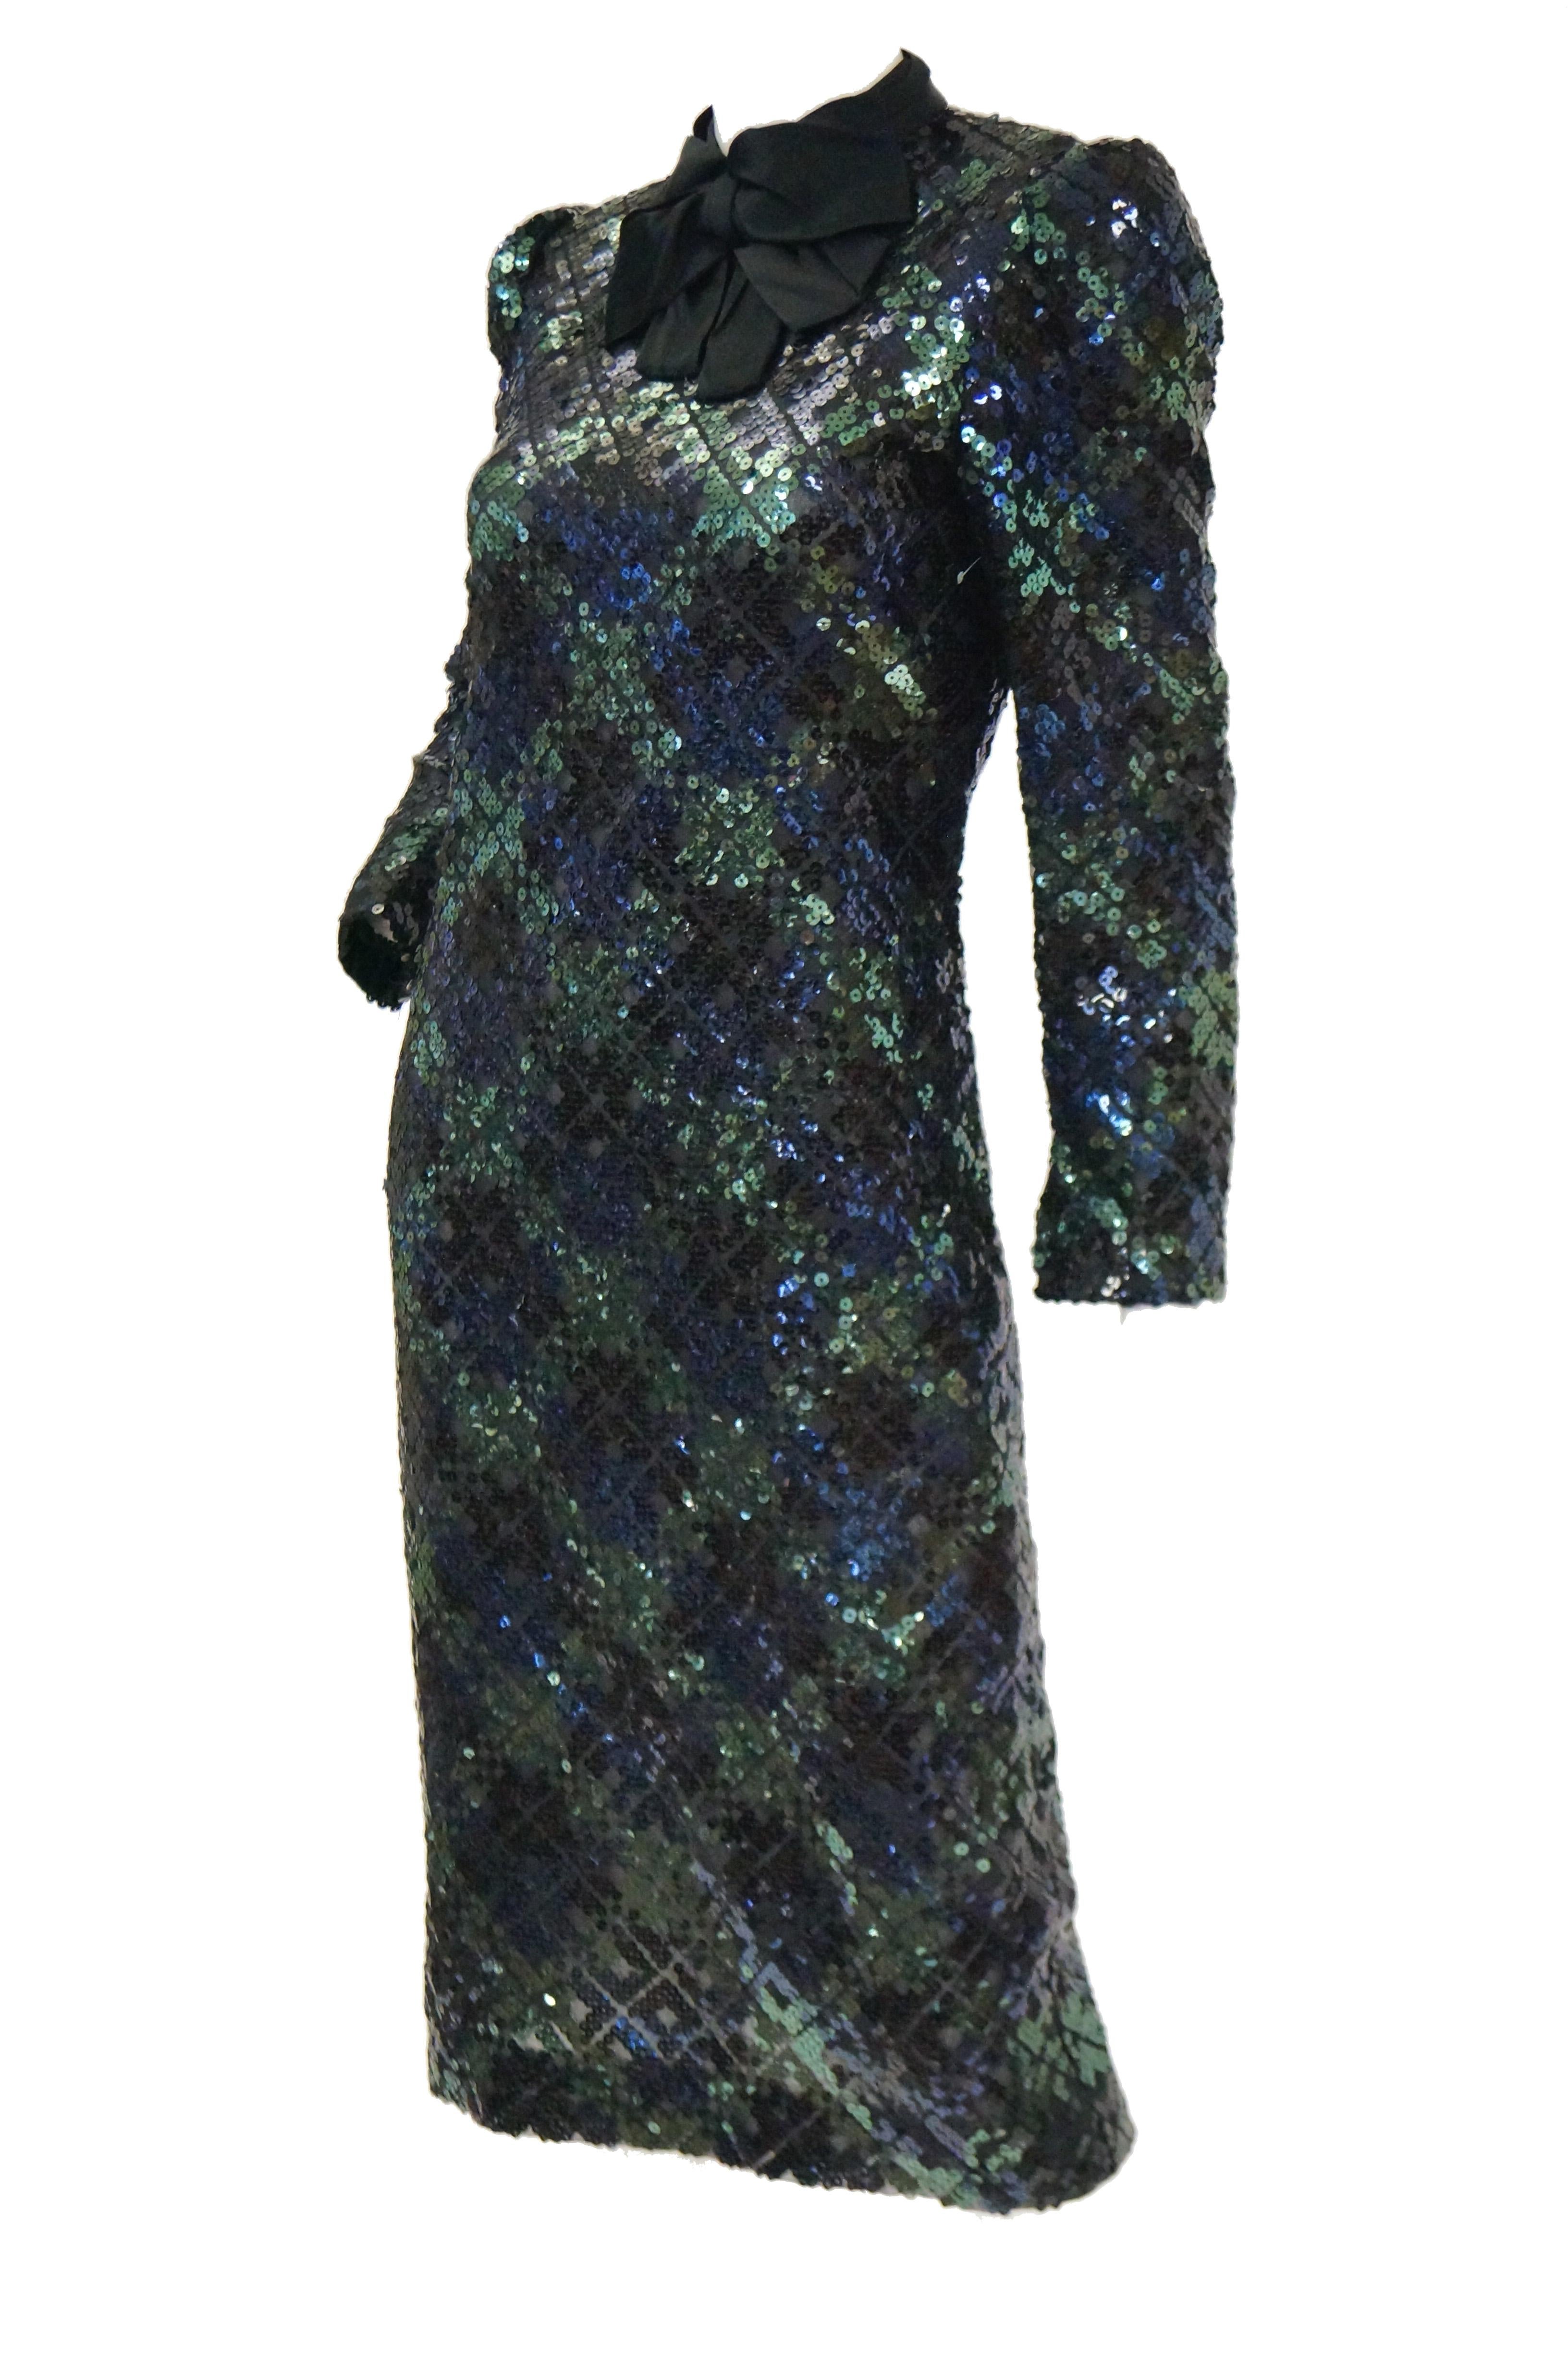 1980s Bill Blass Black, Green and Navy Tartan Sequined Evening Dress In Excellent Condition For Sale In Houston, TX